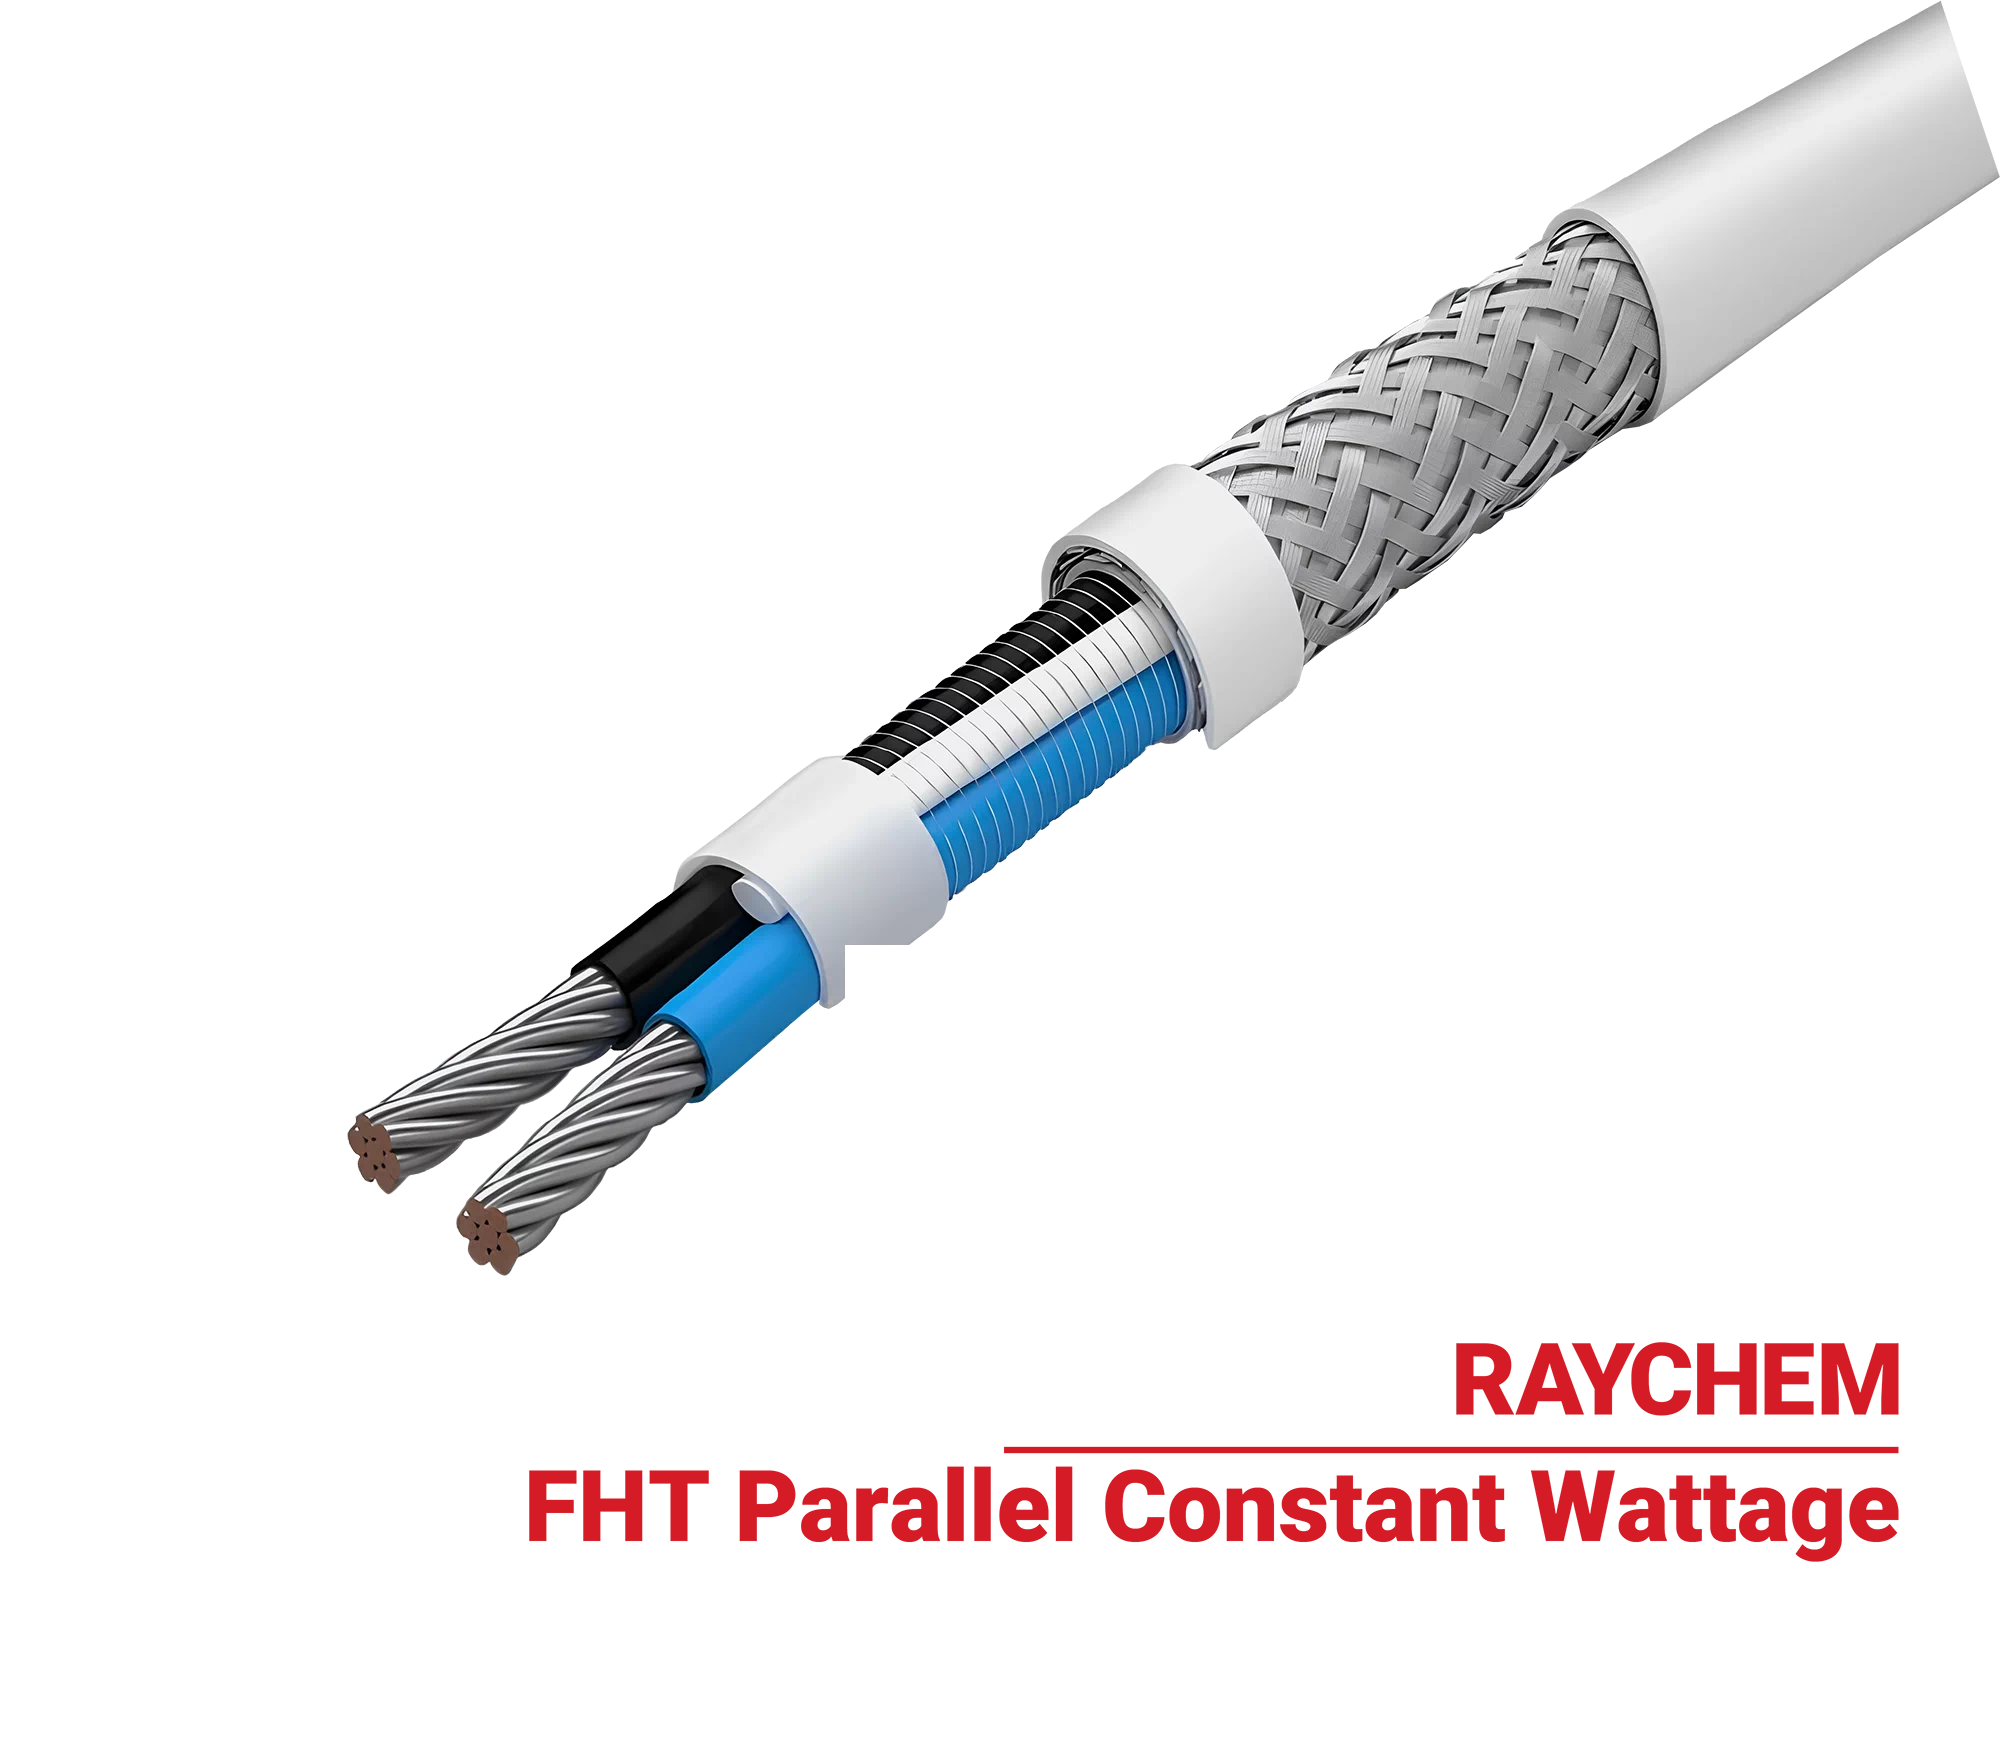 FHT-Parallel-Constant-Wattage-Industrial-Heating-Cable-nVent-Raychem